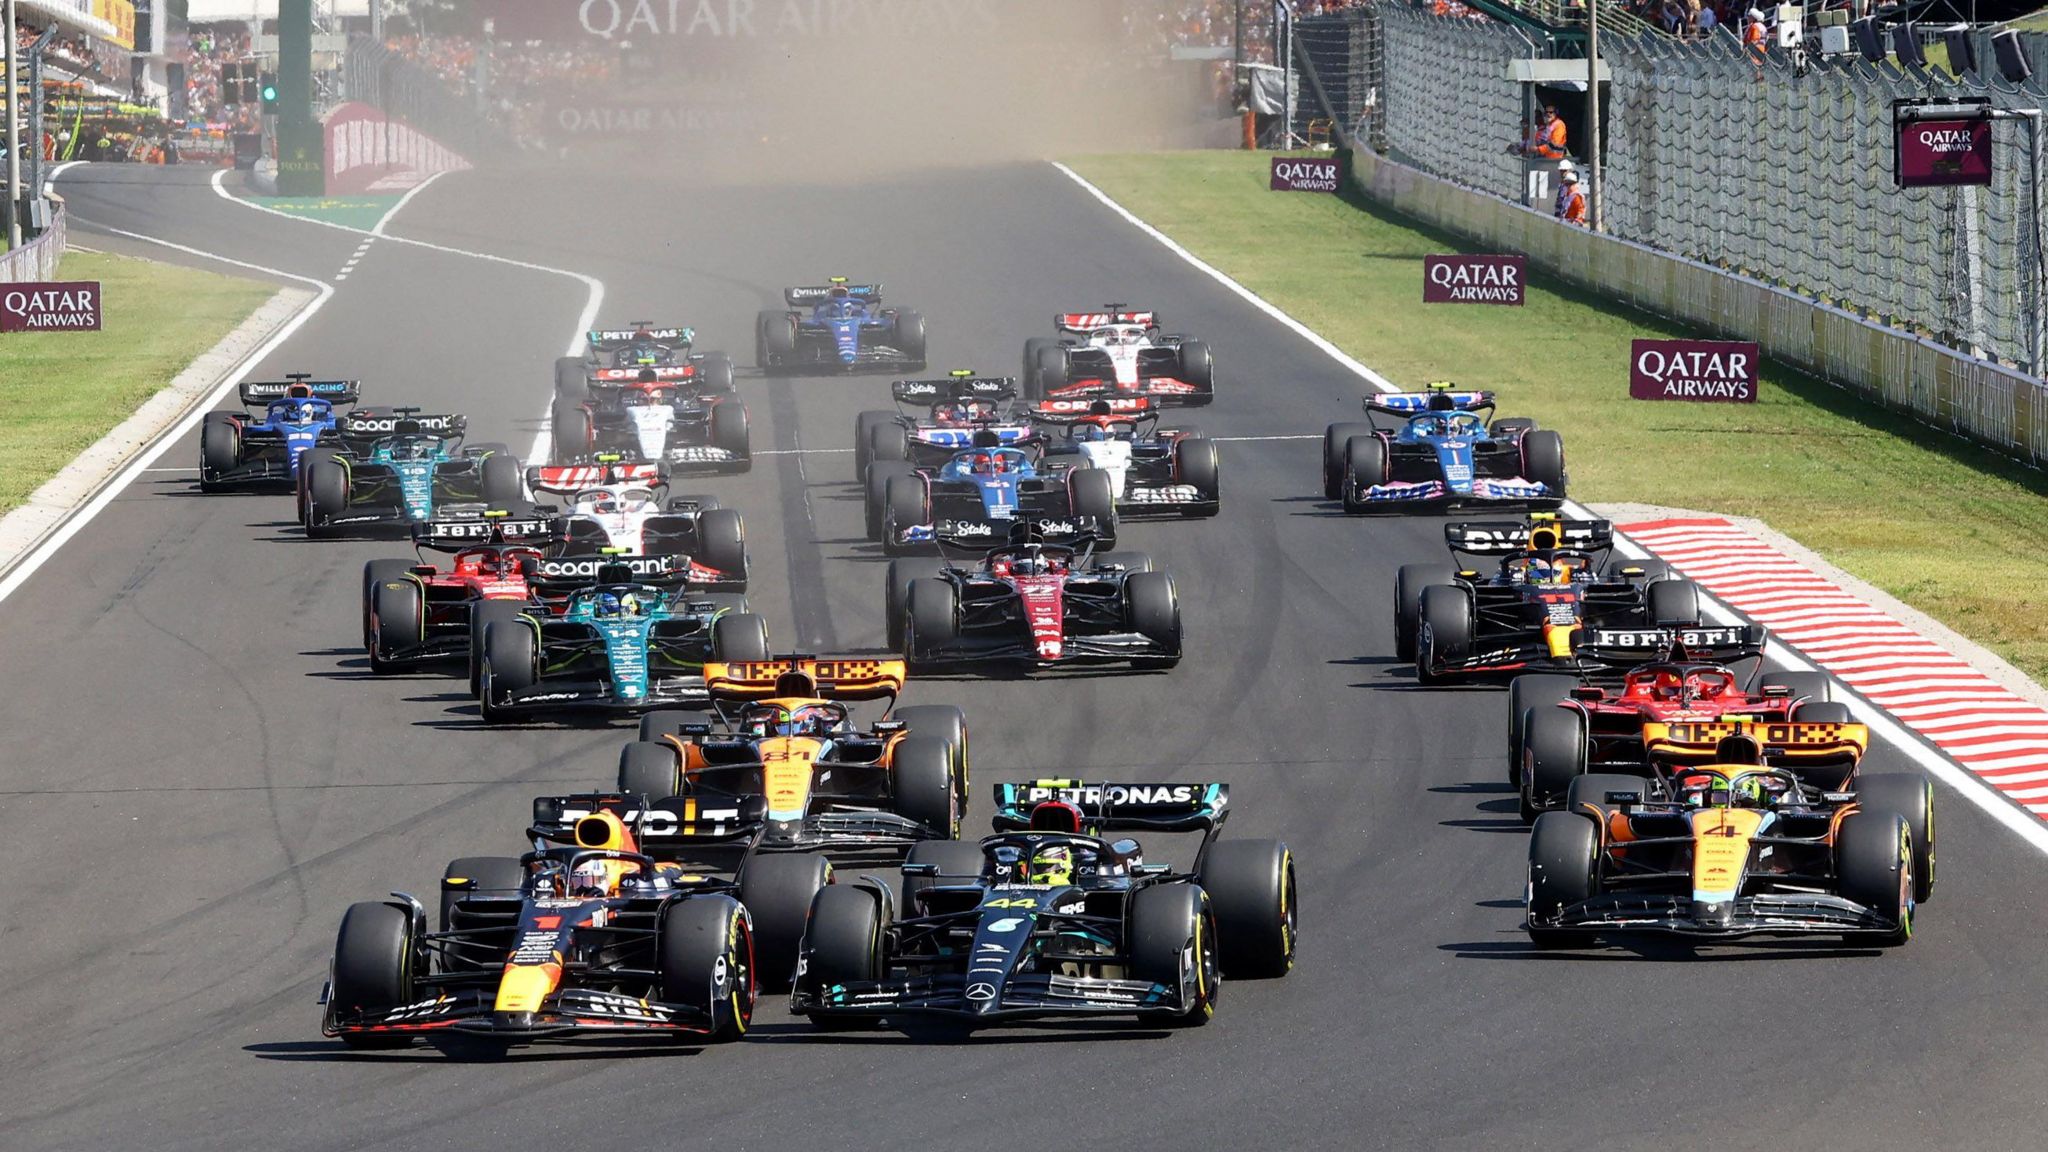 Max Verstappan and Lewis Hamilton contest the lead at the first corner of the 2023 Hungarian Grand Prix